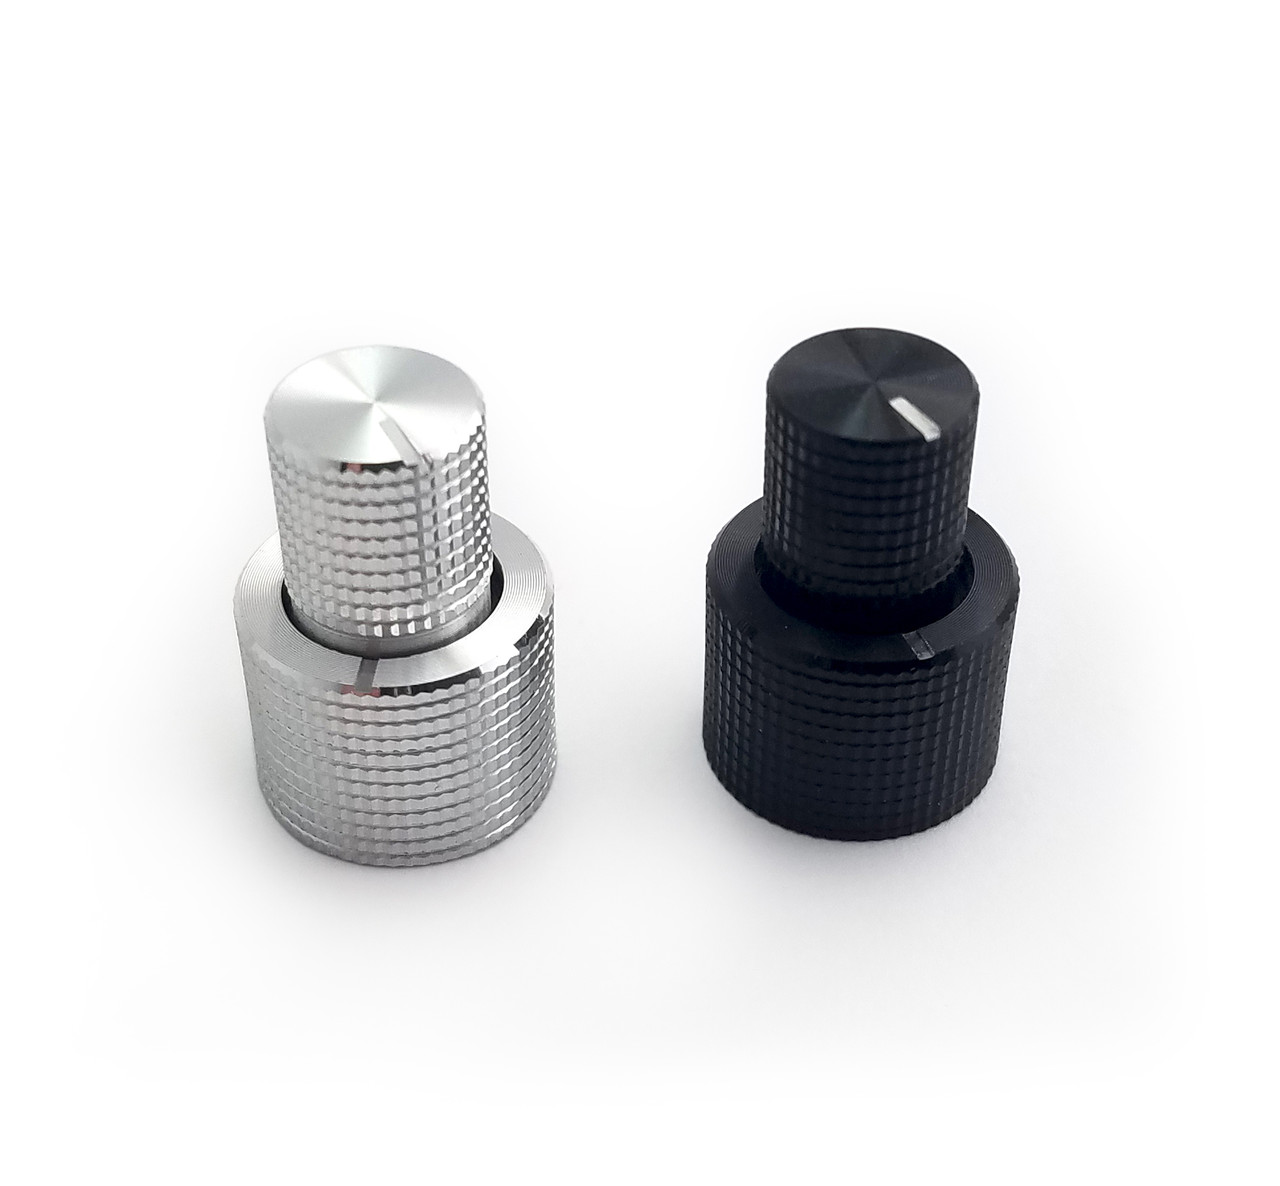 Dual-Concentric Knob For 9mm Pot - Small Bear Electronics